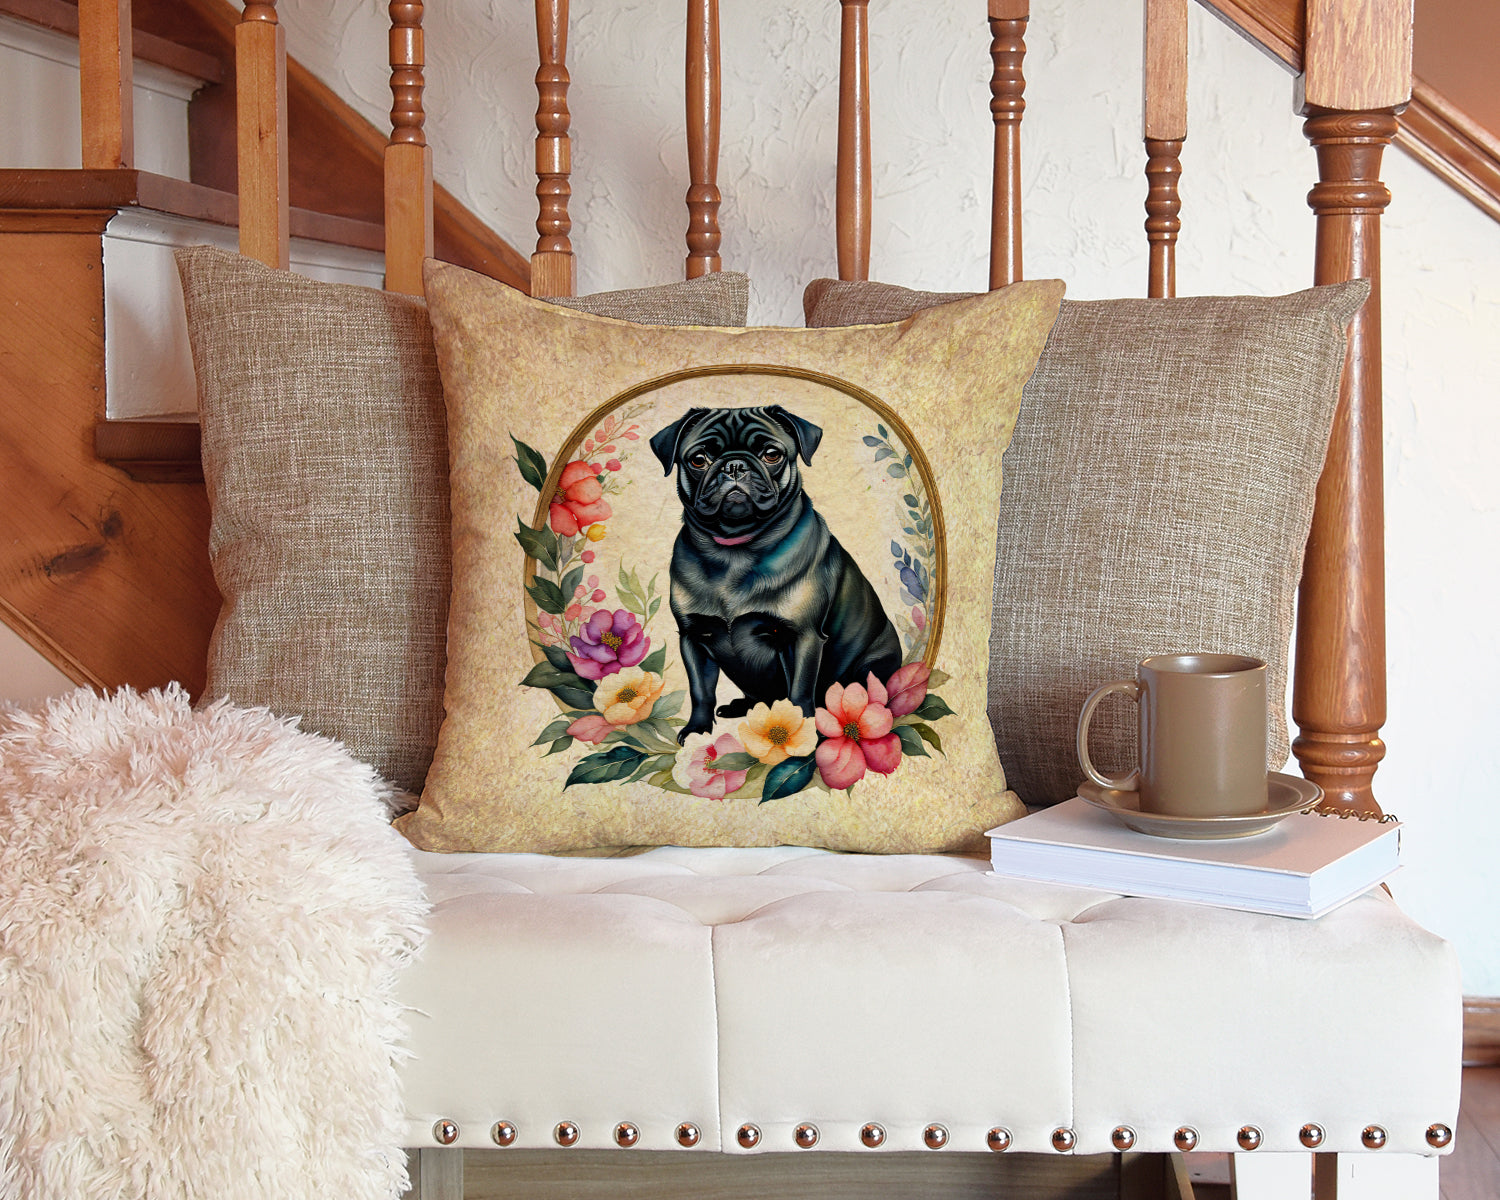 Black Pug and Flowers Fabric Decorative Pillow